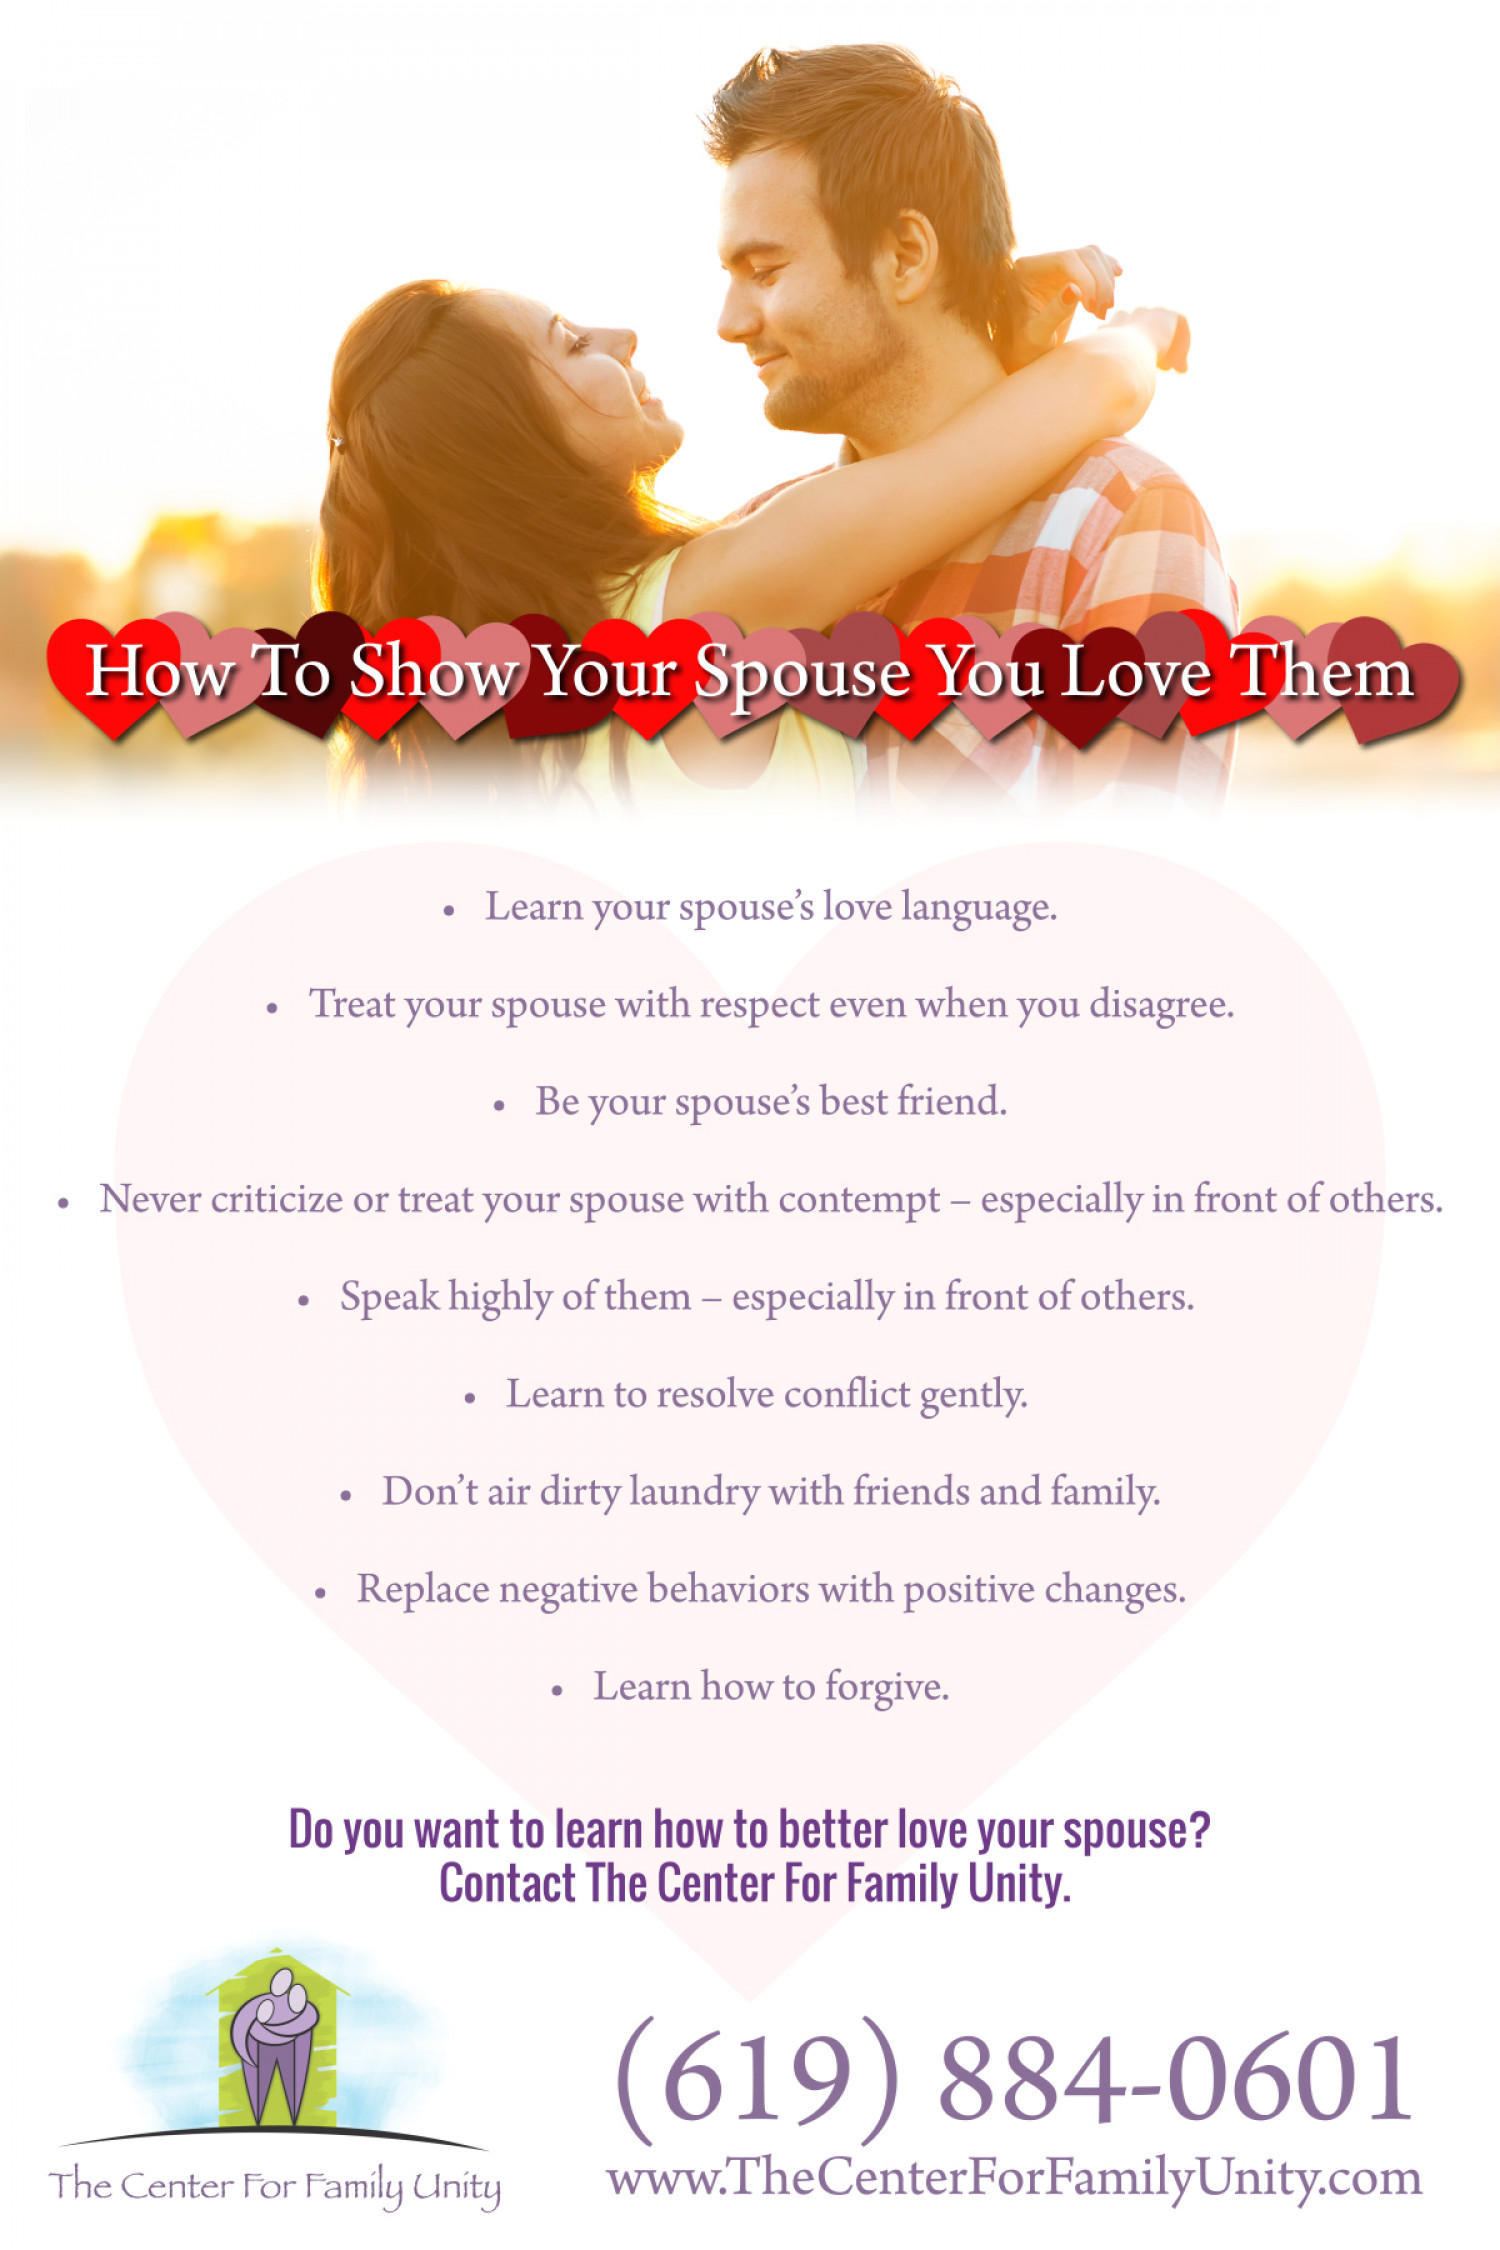 How To Show Your Spouse You Love Them Infographic